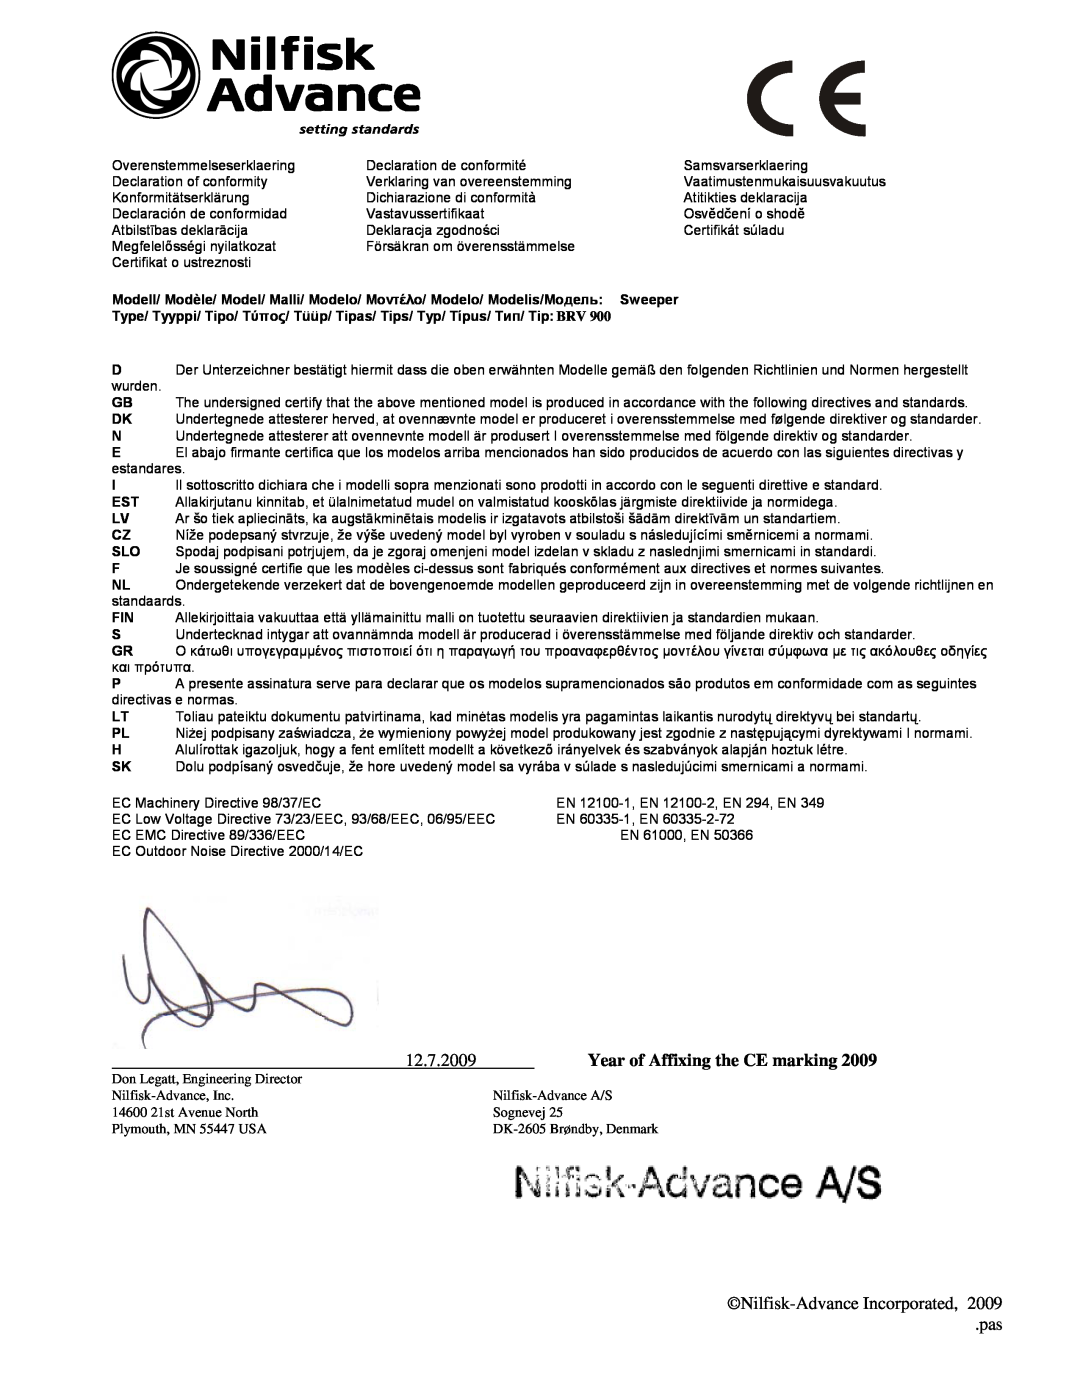 Nilfisk-Advance America BRV 900 manual 12.7.2009, Year of Affixing the CE marking, Nilfisk-AdvanceIncorporated, pas 